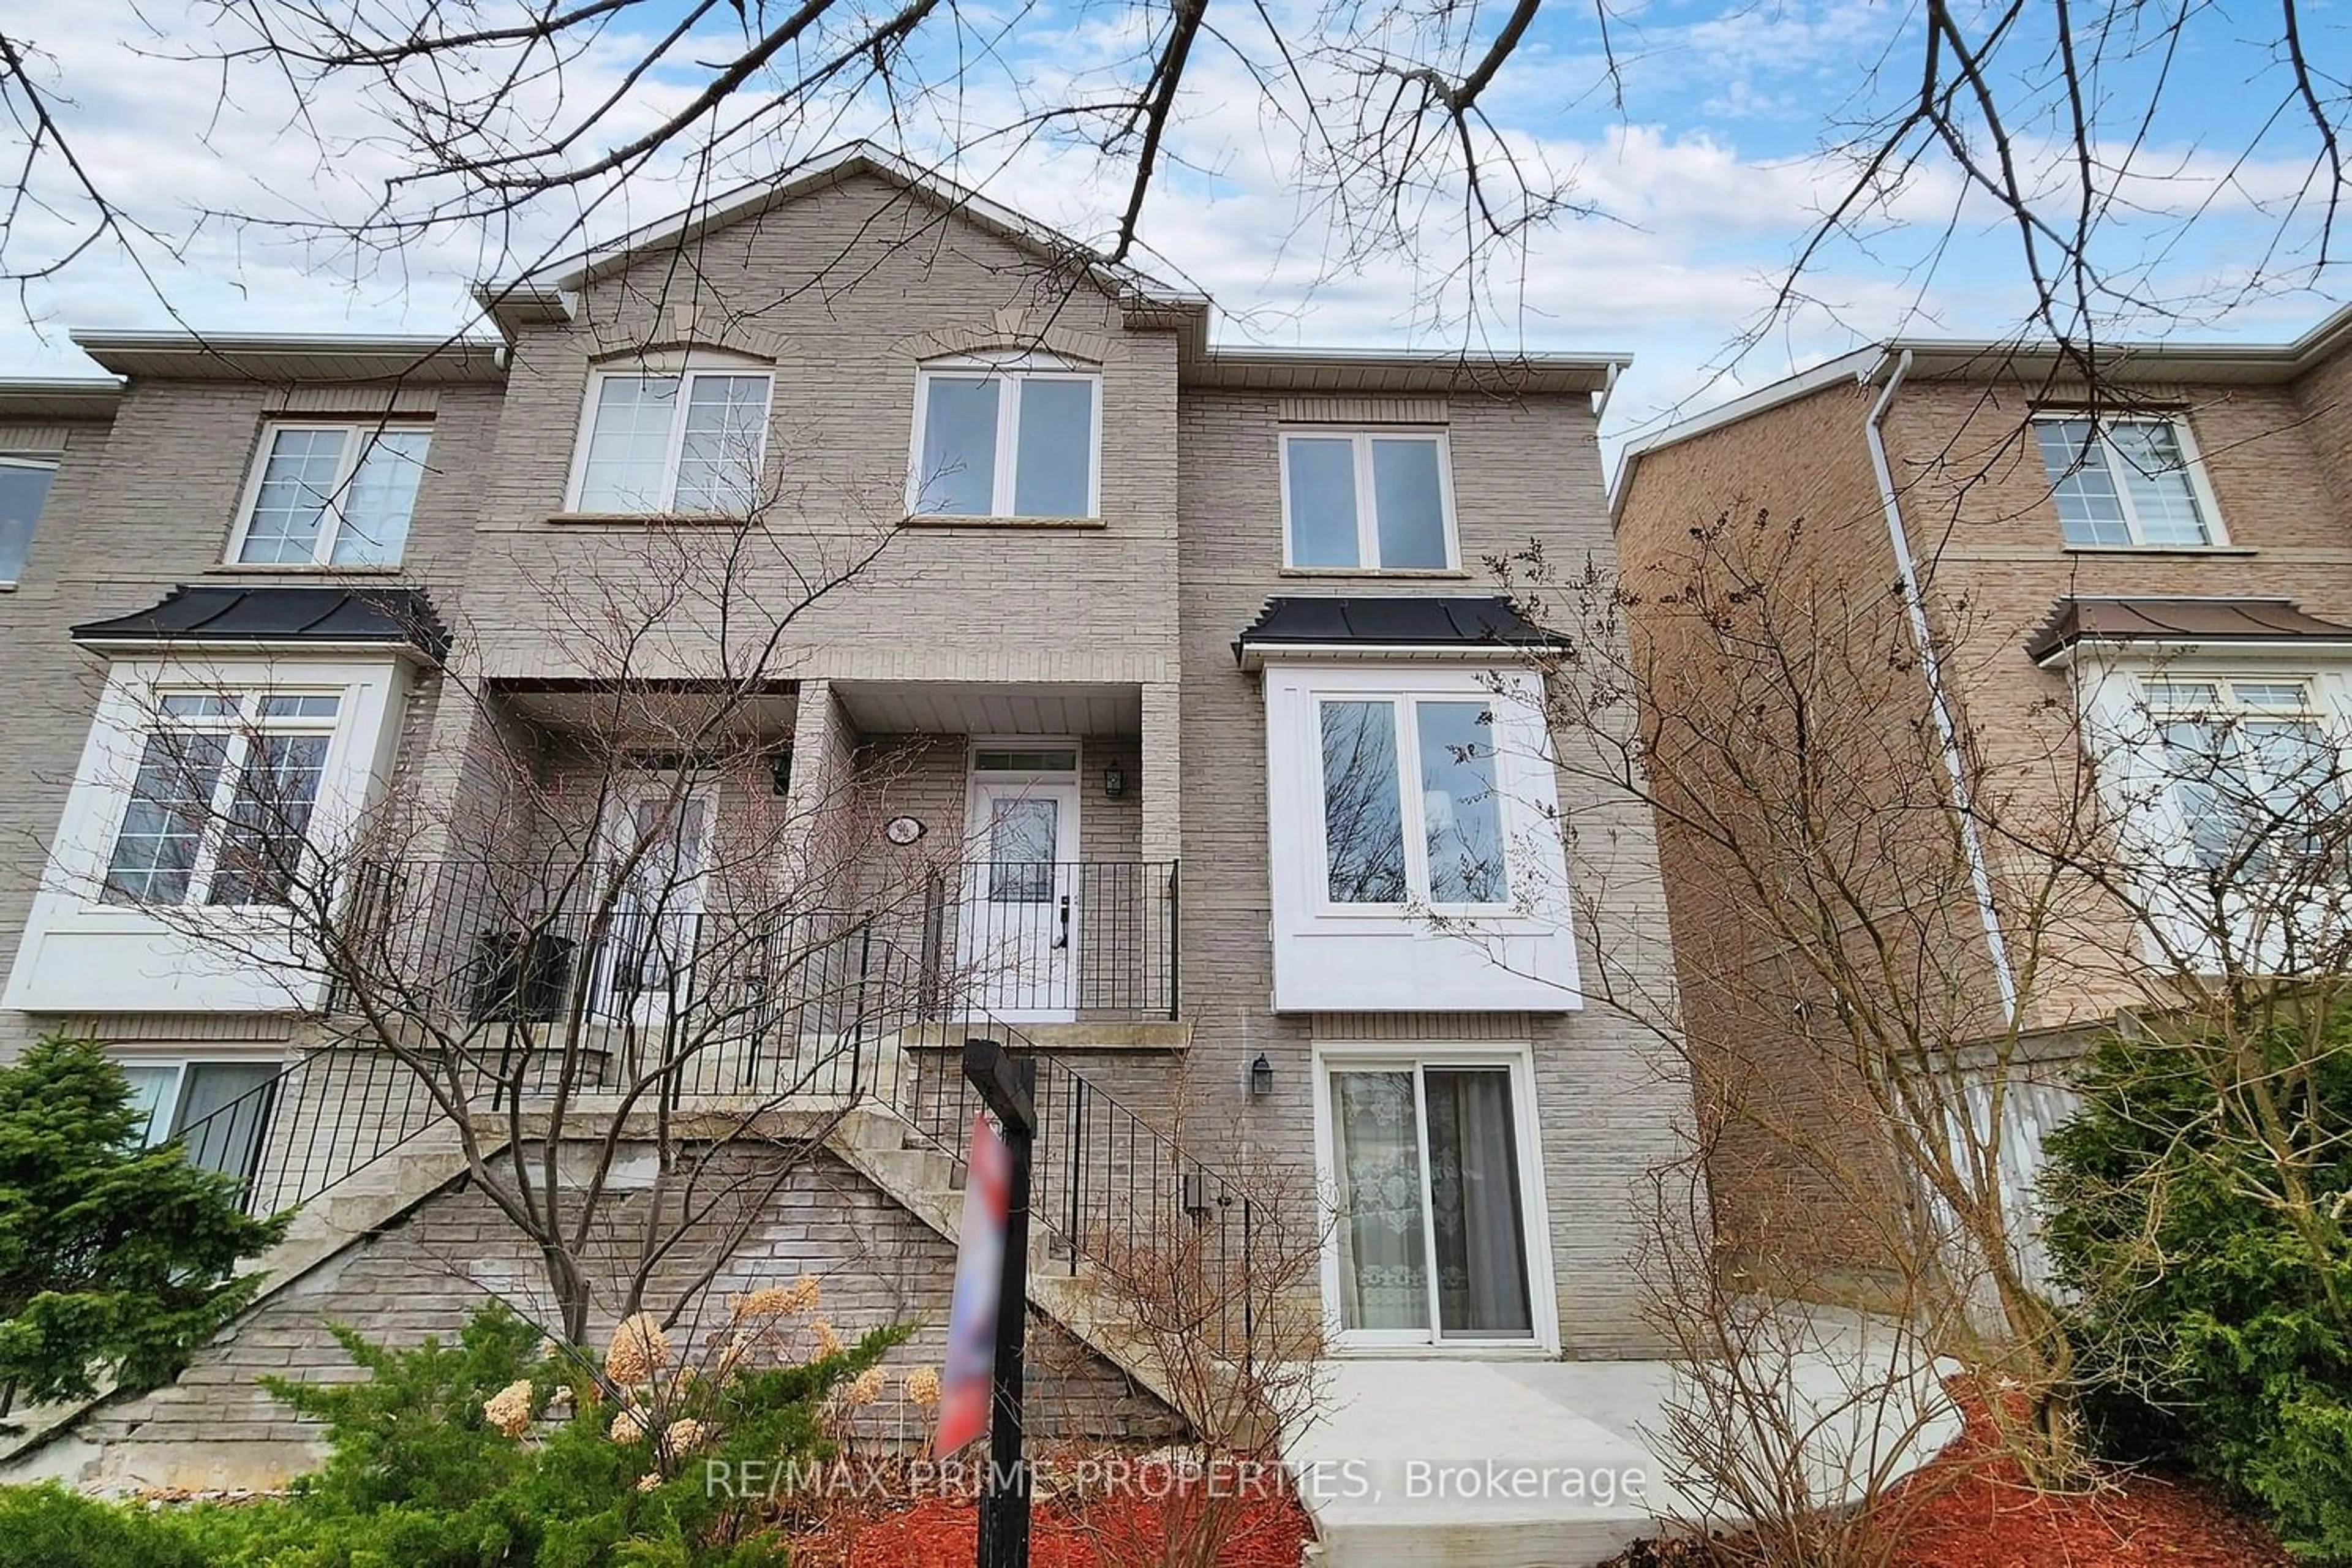 A pic from exterior of the house or condo for 96 Sunway Sq, Markham Ontario L3P 7X5